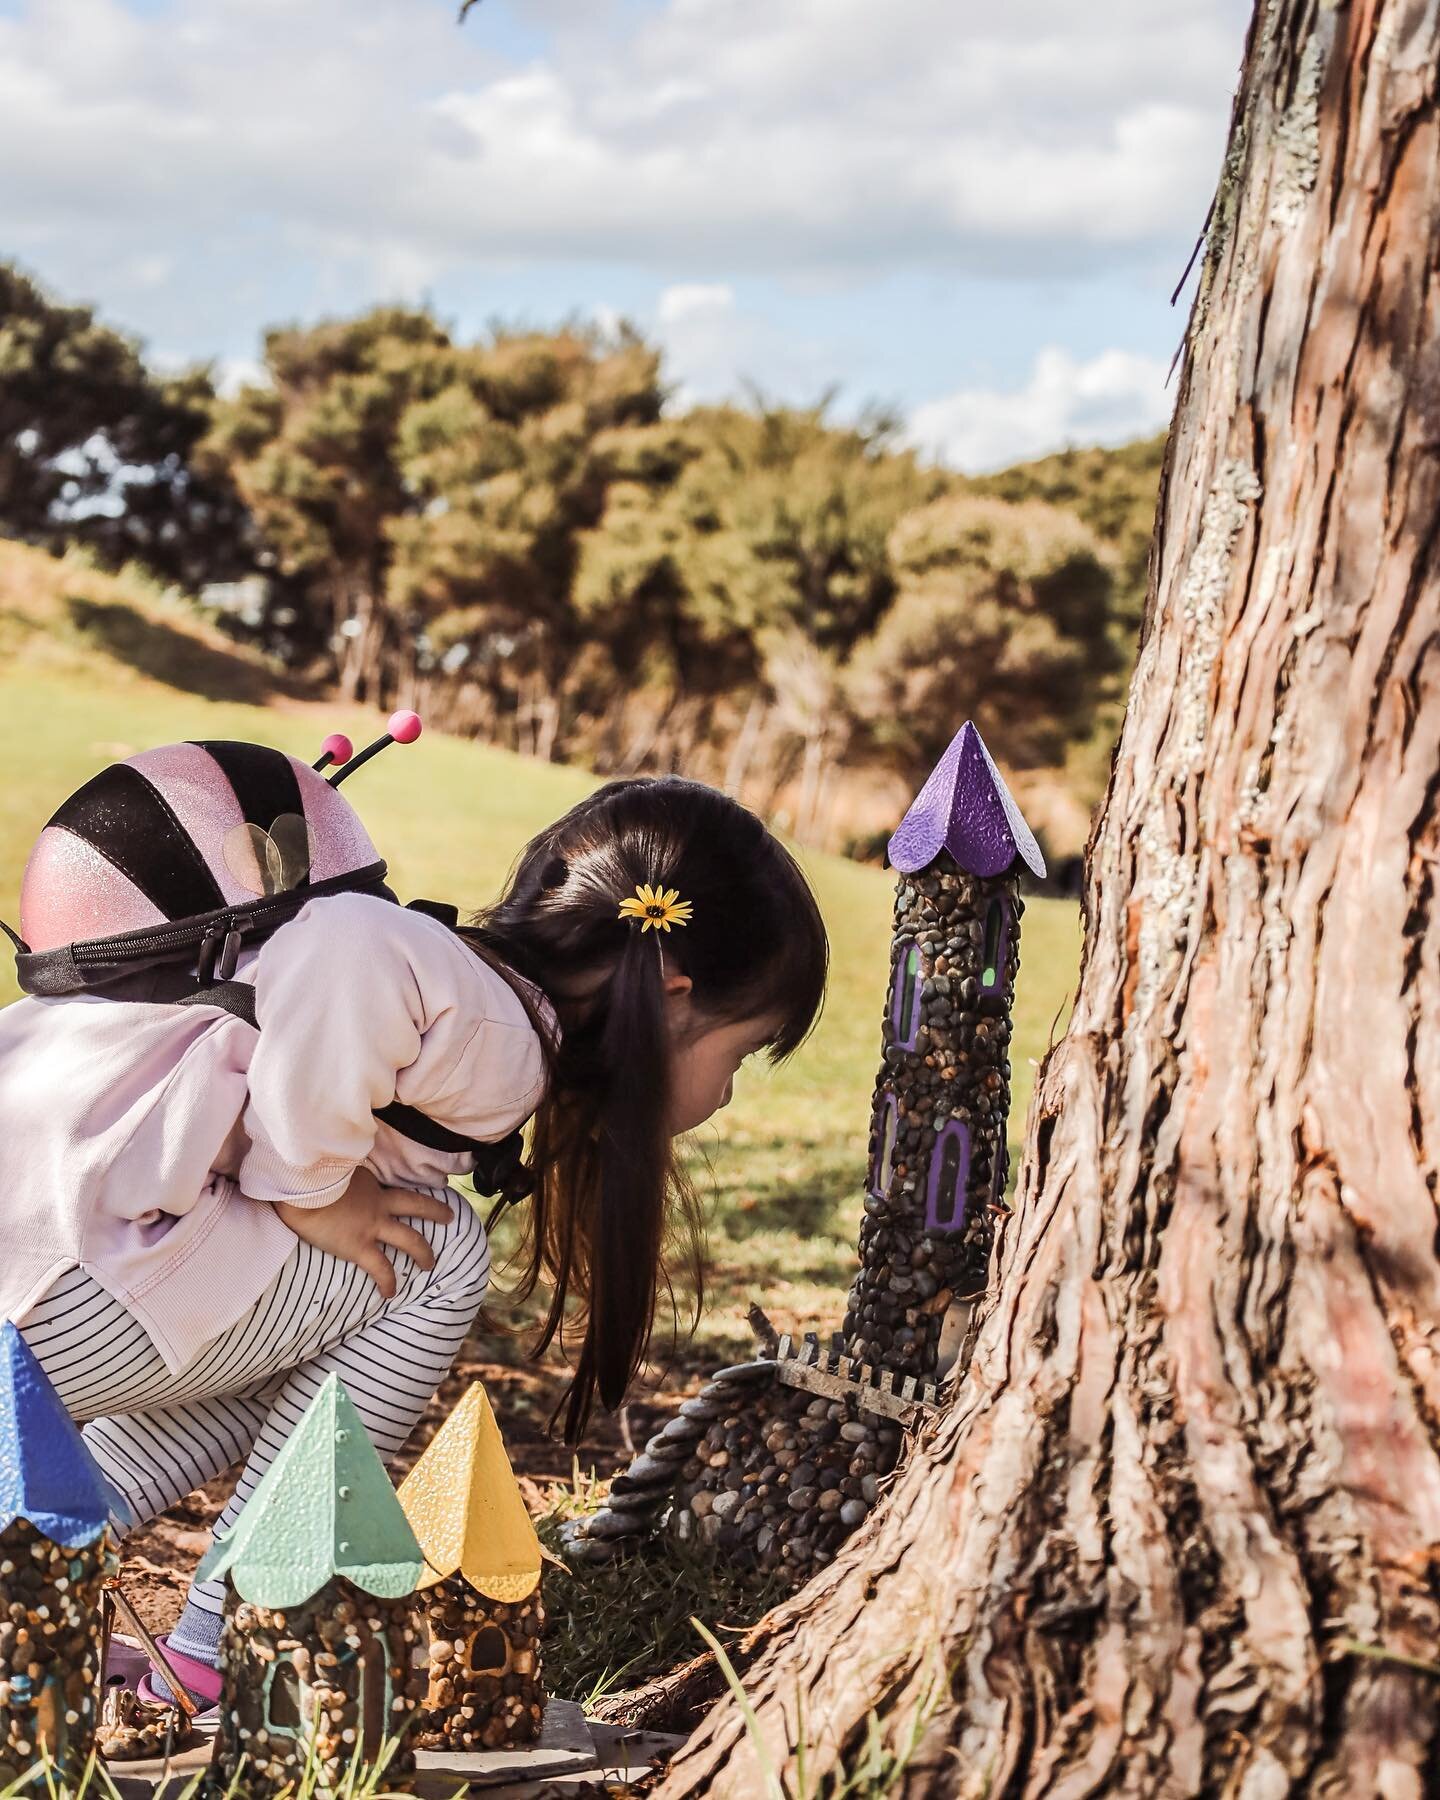 We began creating fairy houses and putting them in our local park during the first week of New Zealand's Covid-19 lockdown in March 2020. We imagined kids dragging their parents outdoors with them to &quot;see the fairies&quot;, which is exactly what